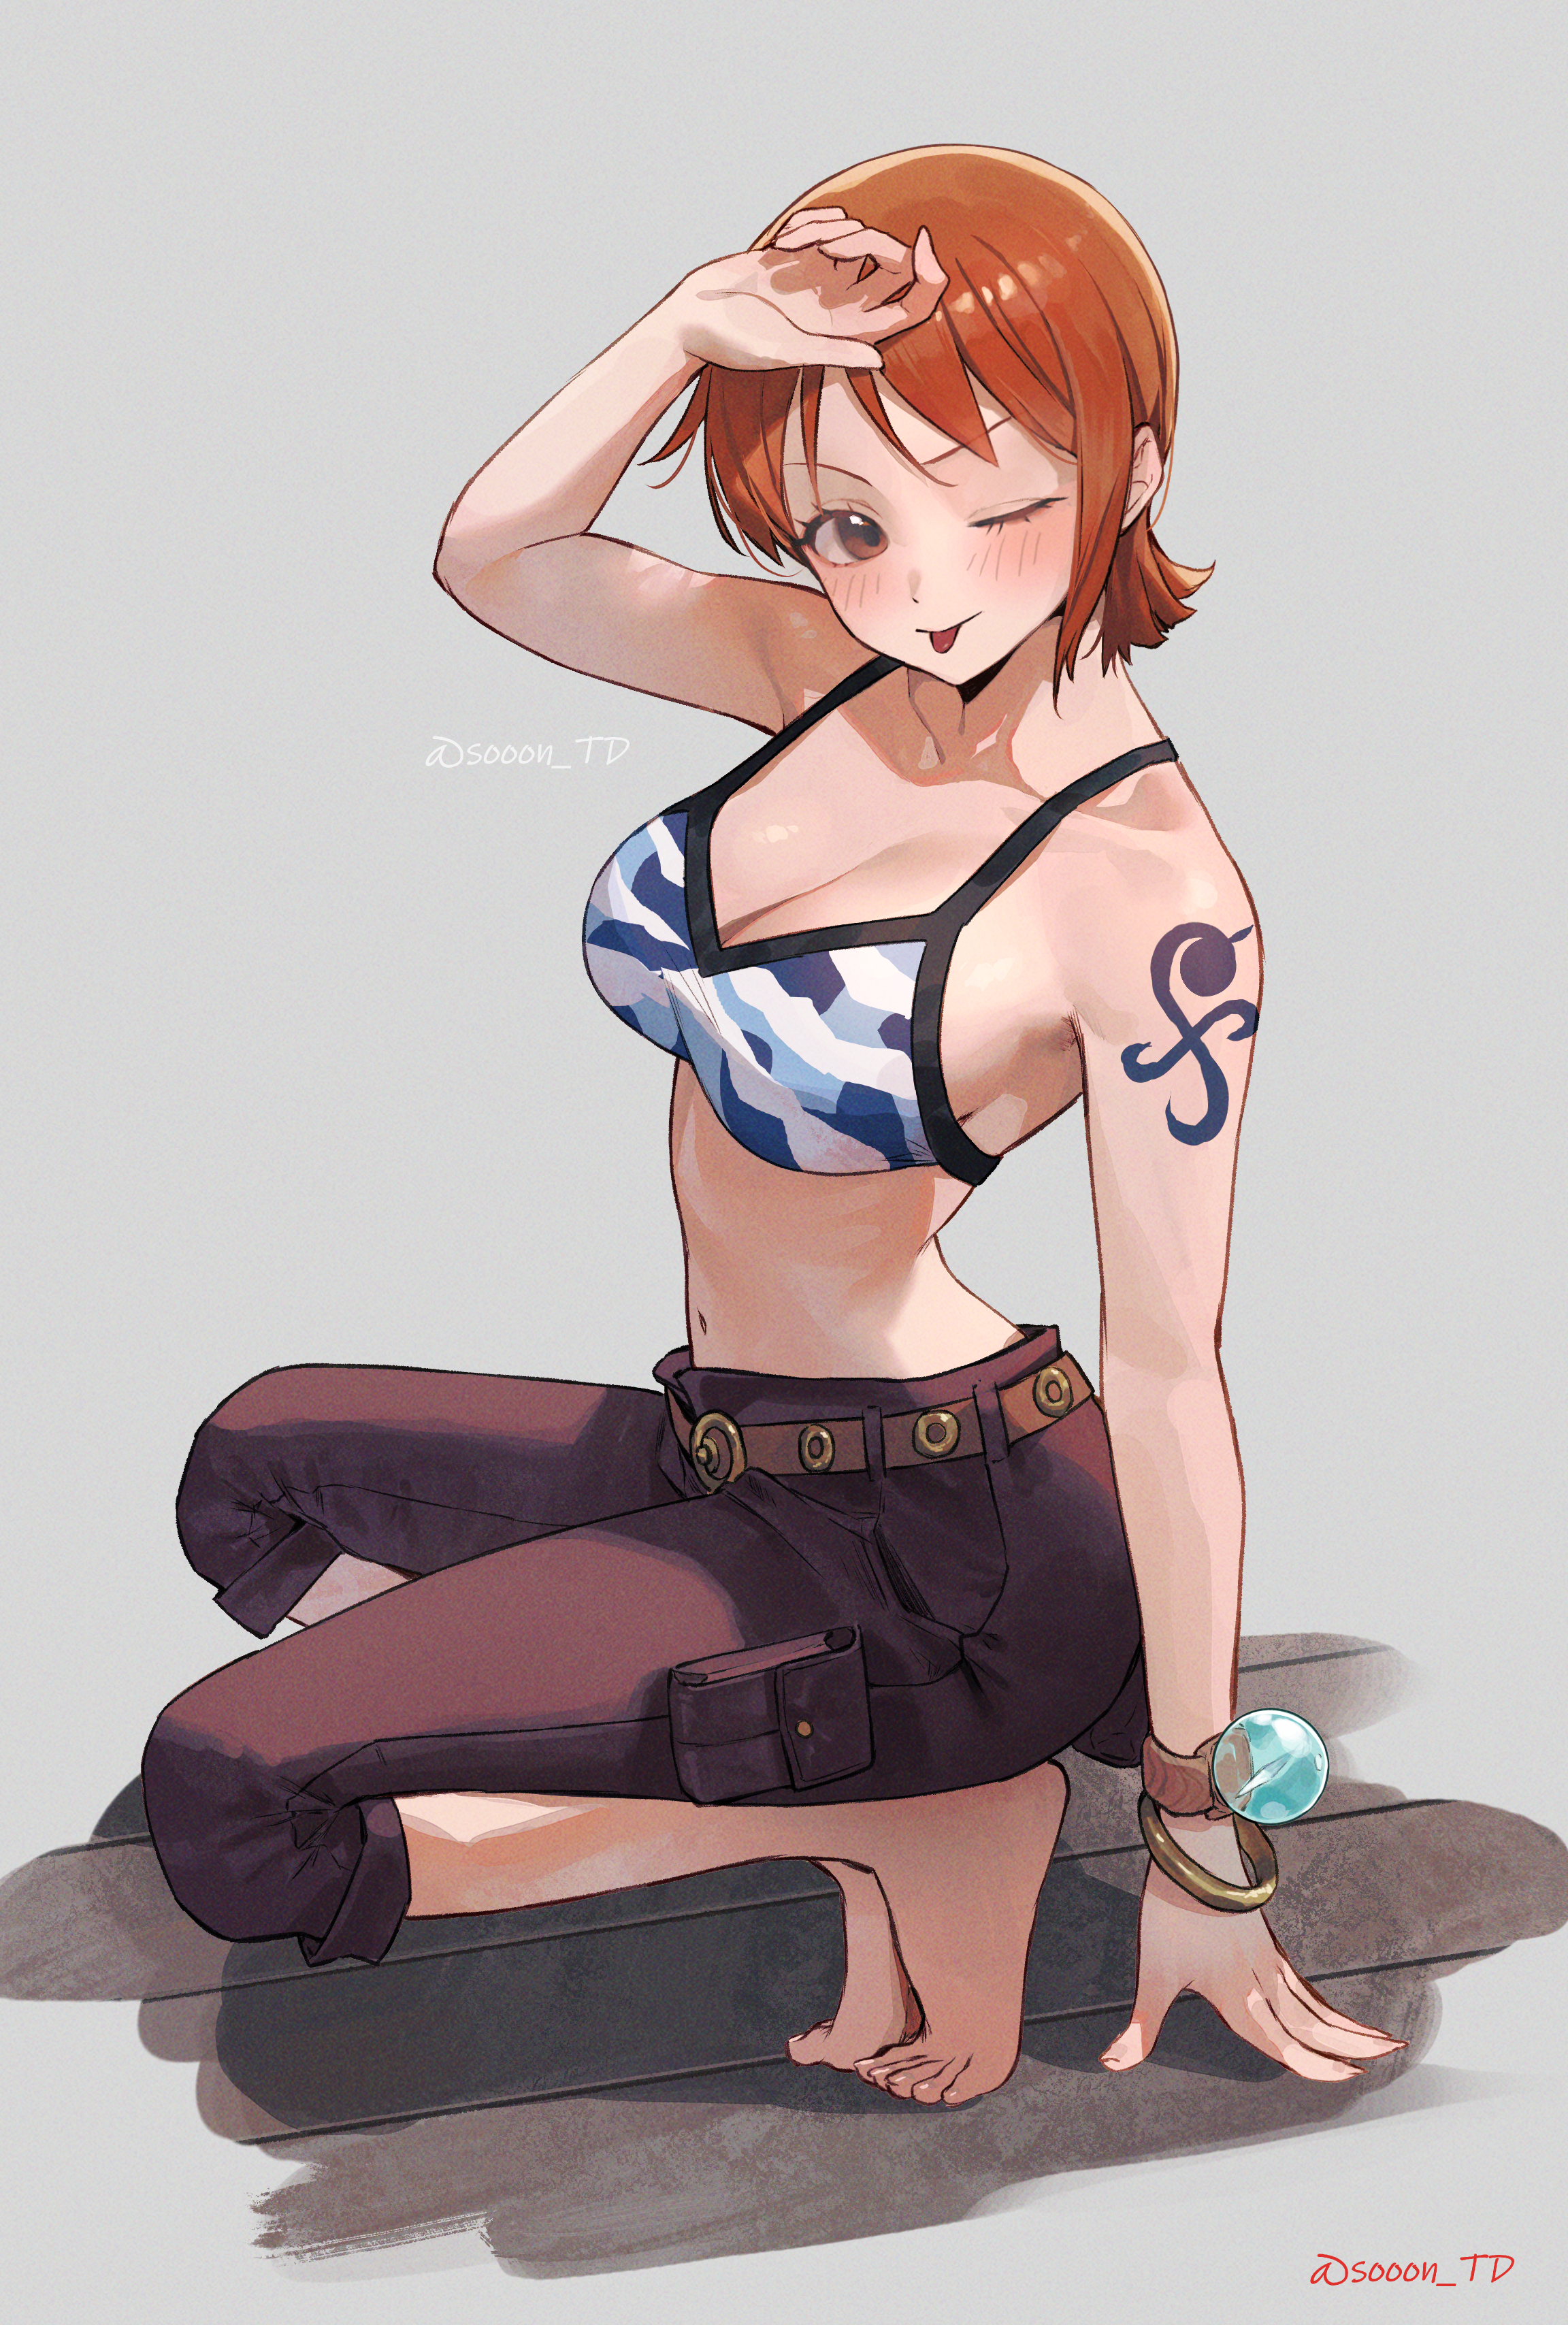 Anime 2304x3416 anime anime girls digital art artwork 2D Pixiv petite belly belly button bare midriff looking at viewer portrait display Nami One Piece tongue out blushing redhead short hair bikini top tattoo bracelets feet simple background Sooon TD